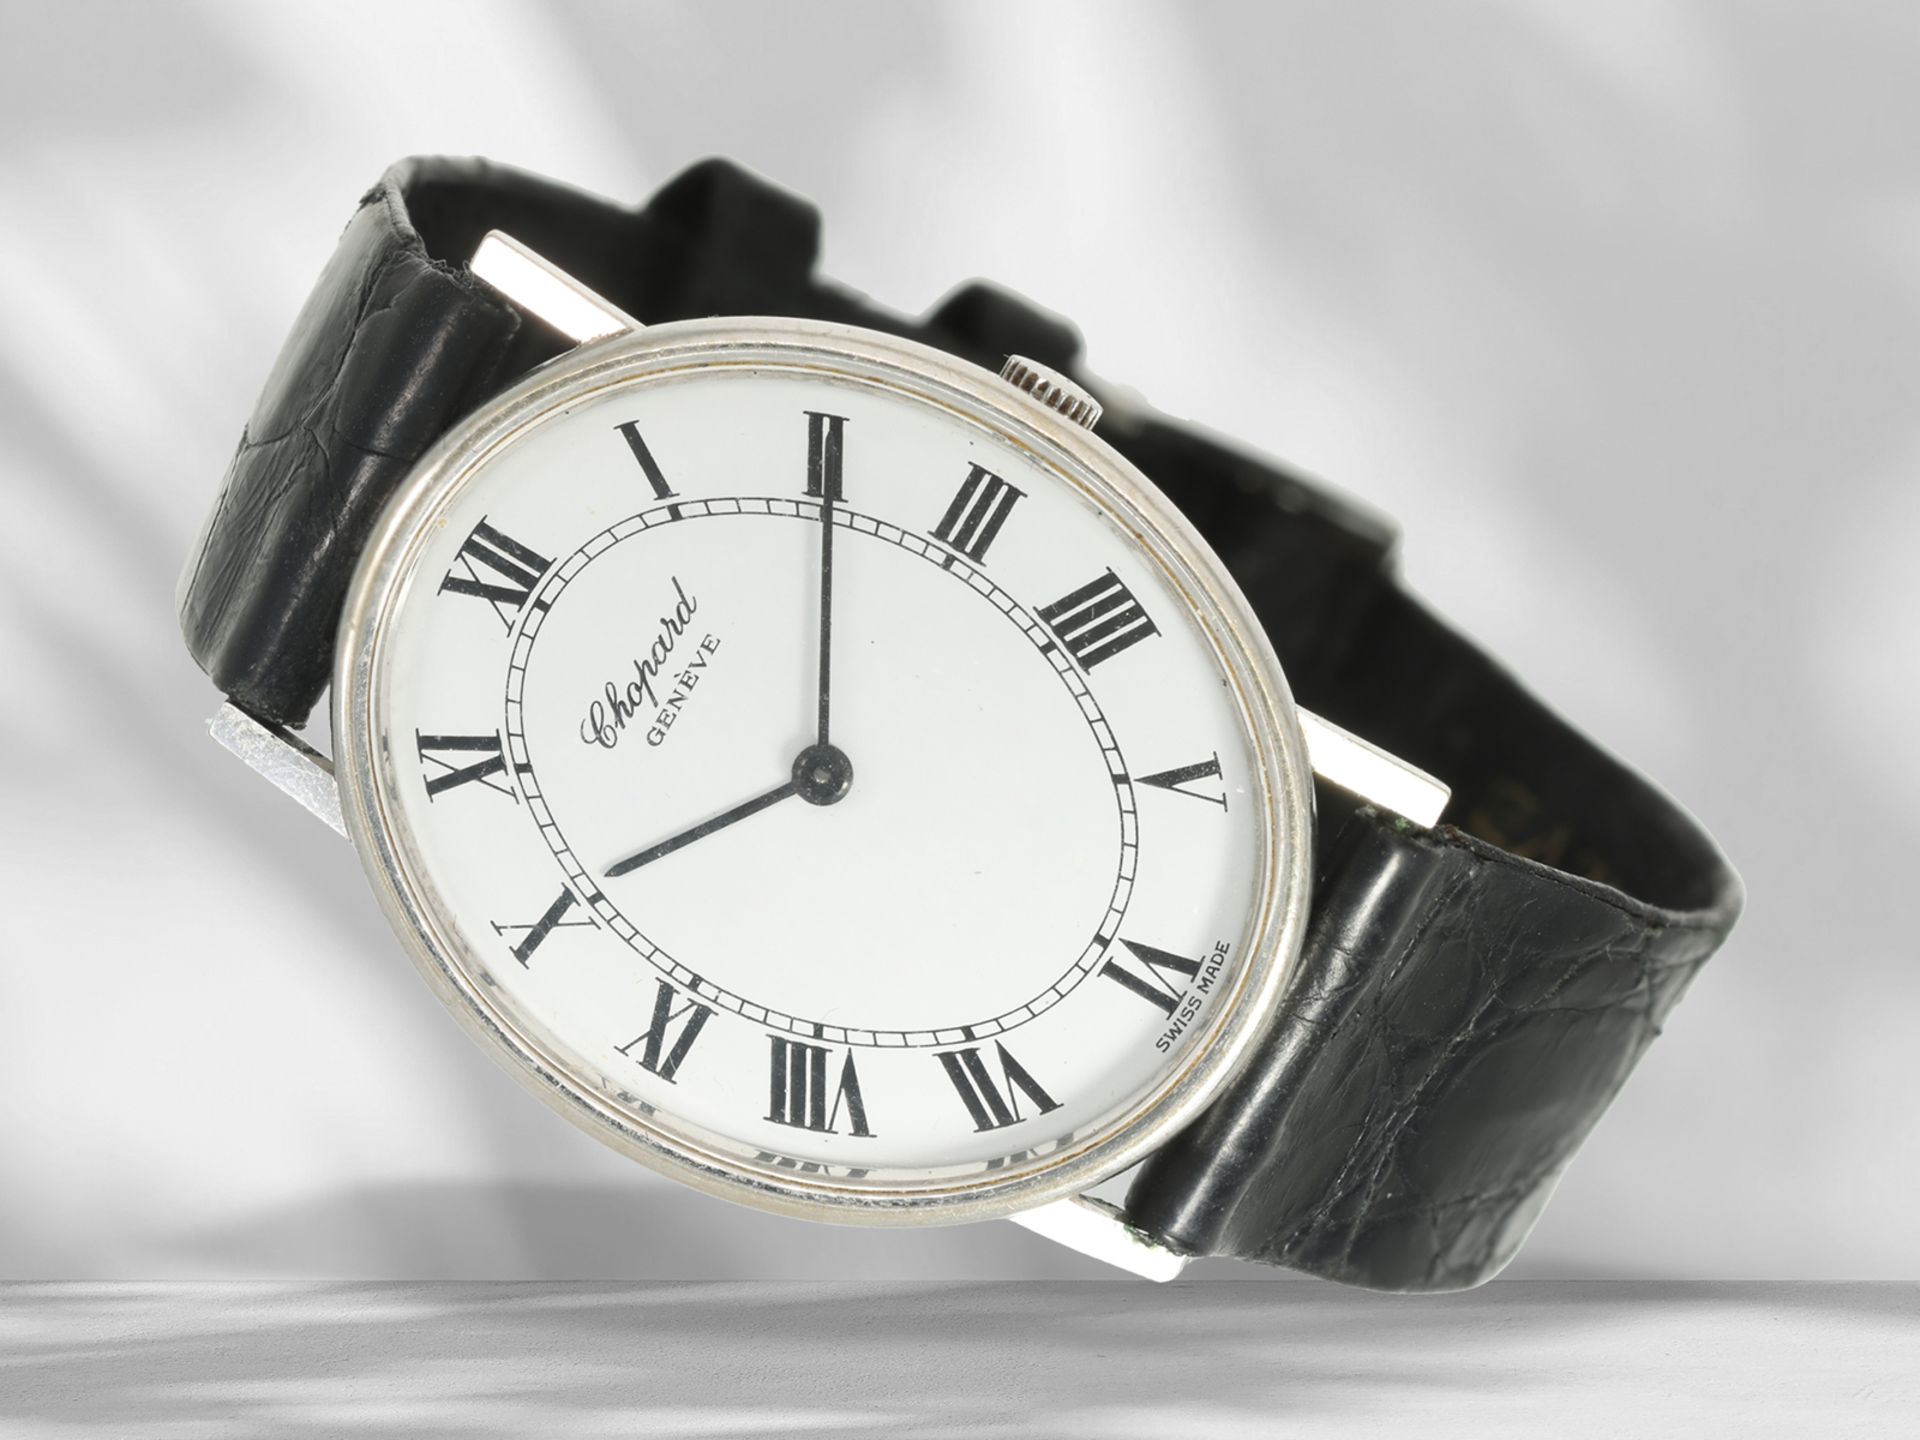 Wristwatch: high-quality and formerly expensive vintage men's watch by Chopard, Ref: 2023, 18K white